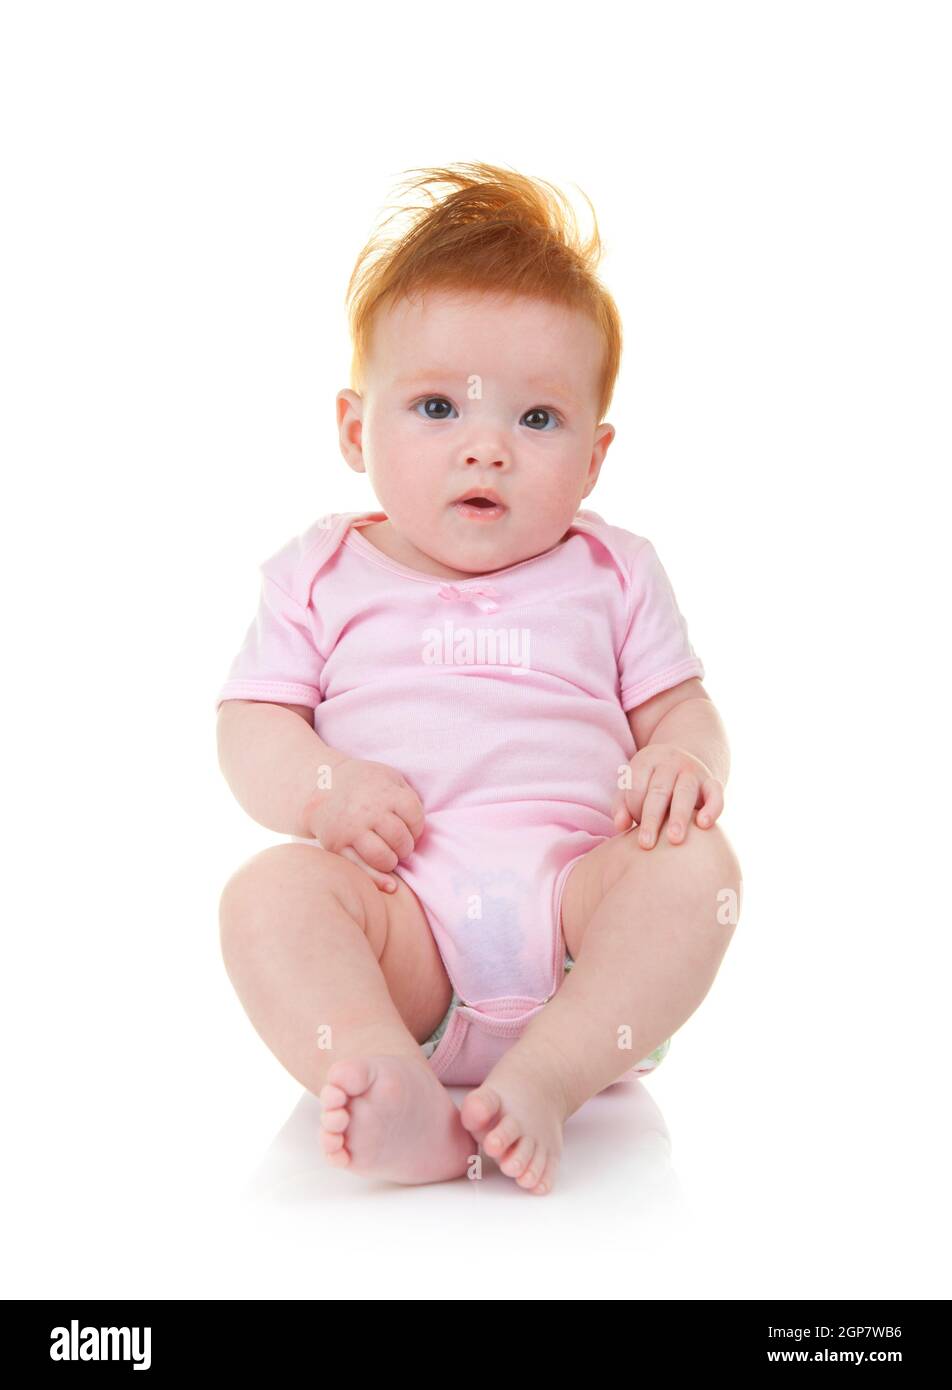 Smiling baby in pink jumpsuit sitting on the floor isolated on white background Stock Photo